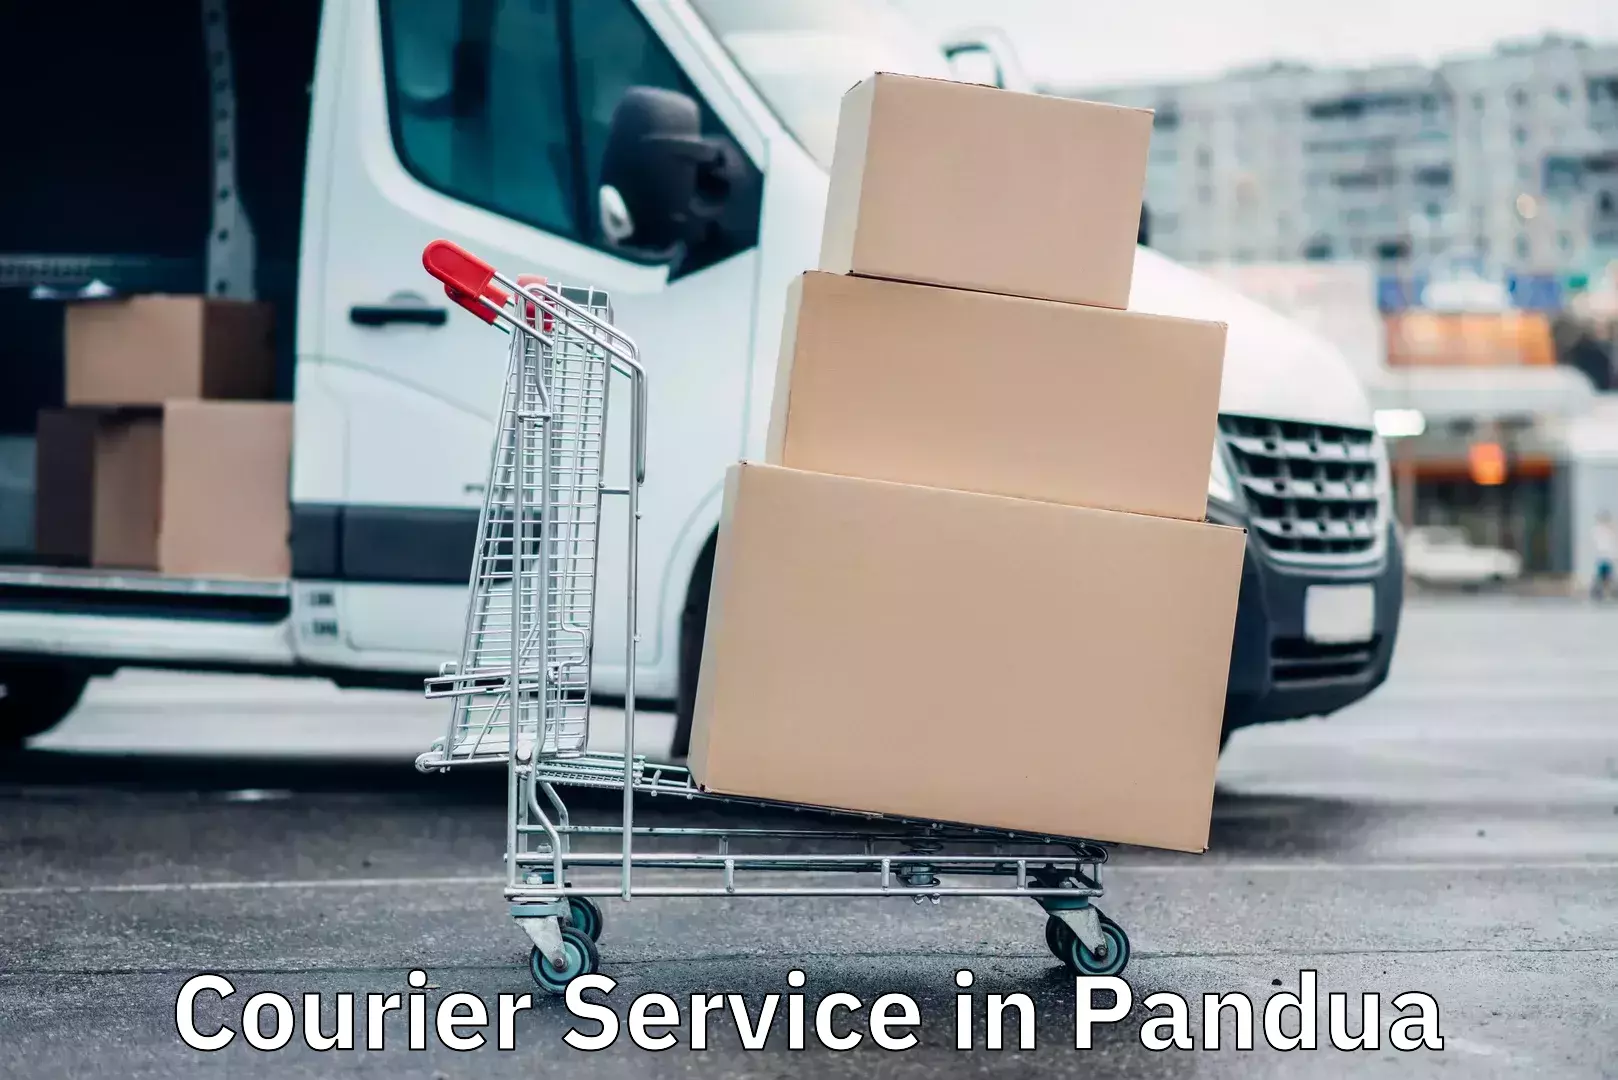 On-call courier service in Pandua